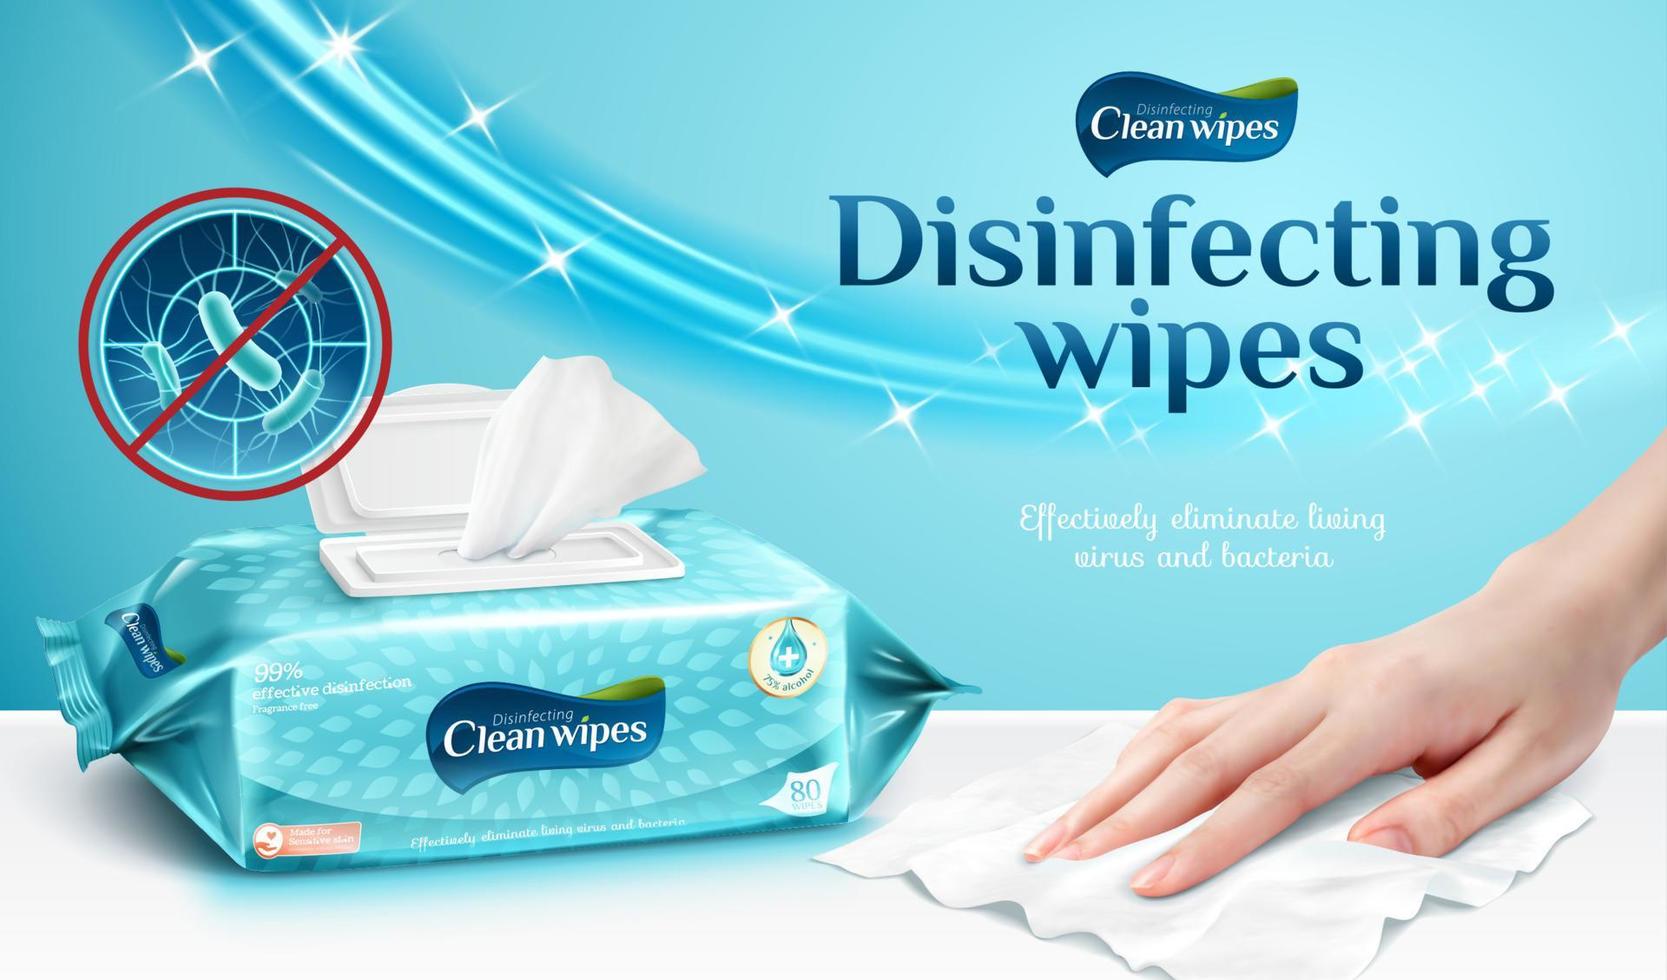 Ad template or package design for cleaning wipes, female hand using wet wipe to clean the table, 3d illustration vector